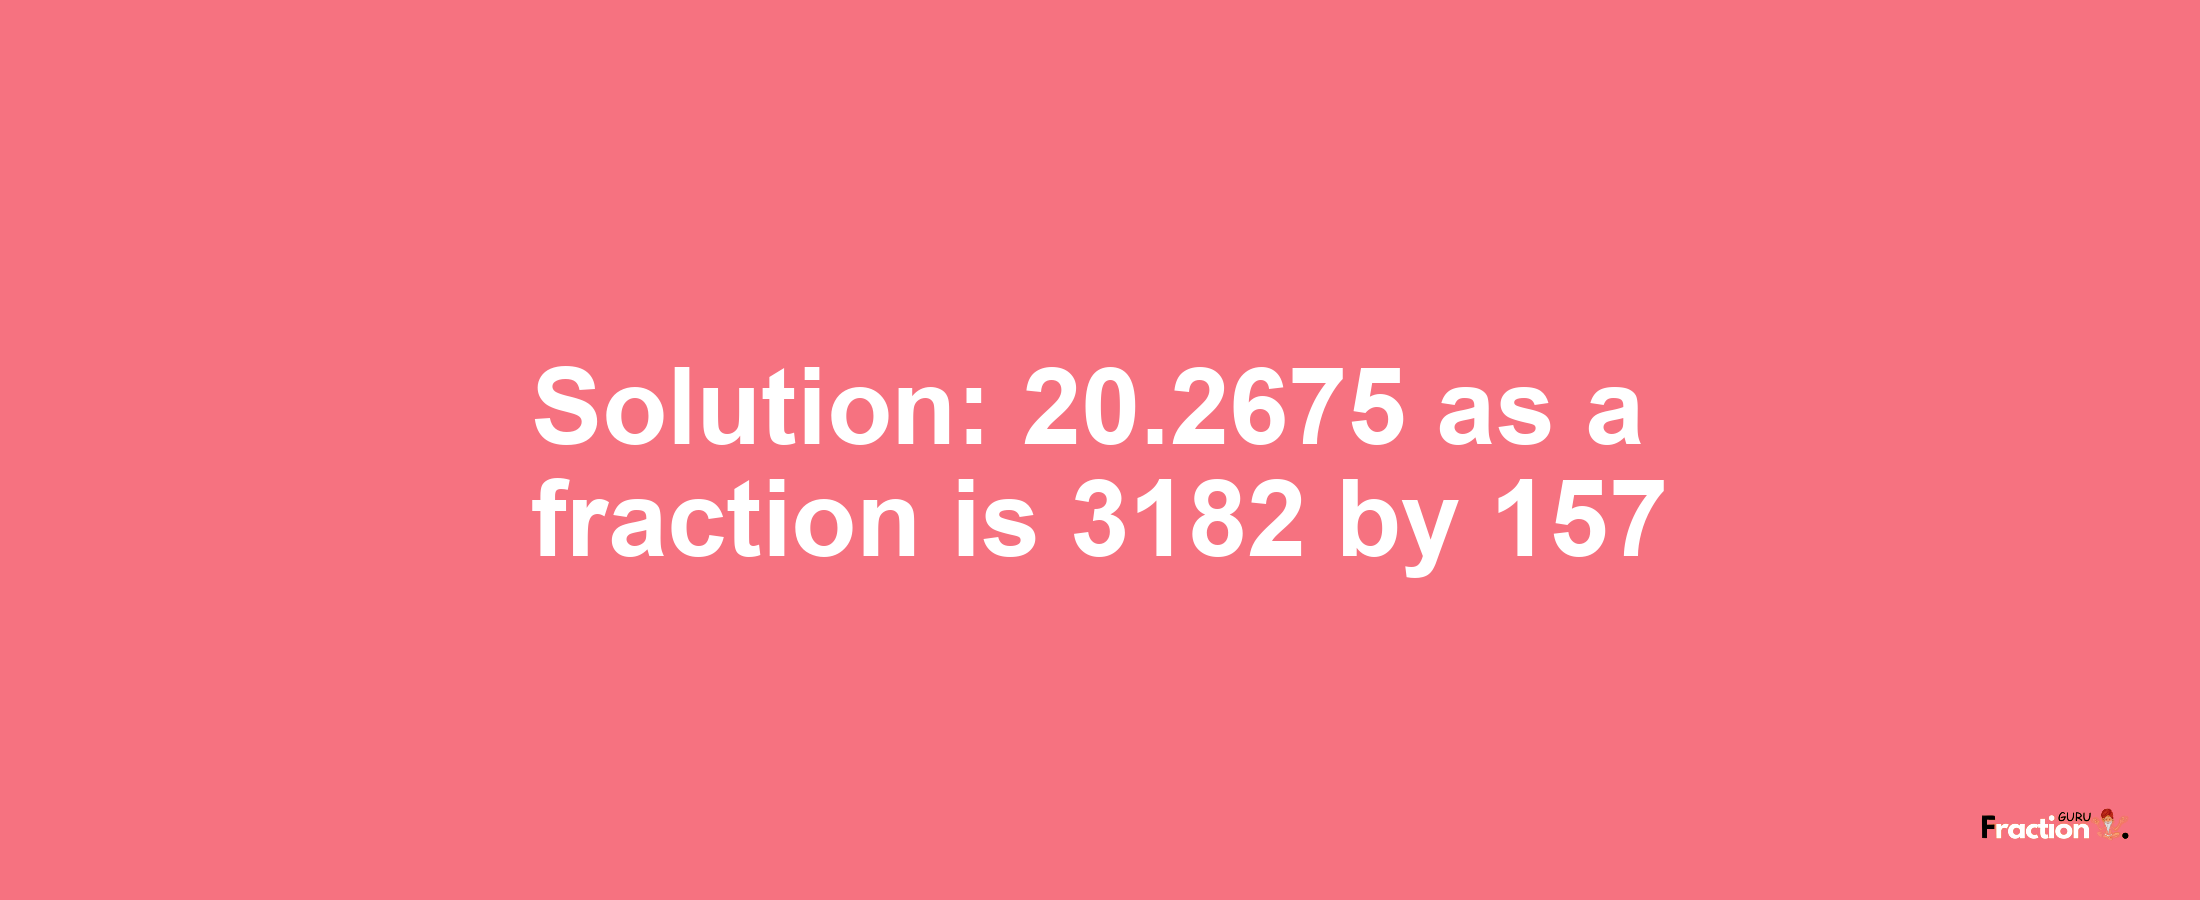 Solution:20.2675 as a fraction is 3182/157